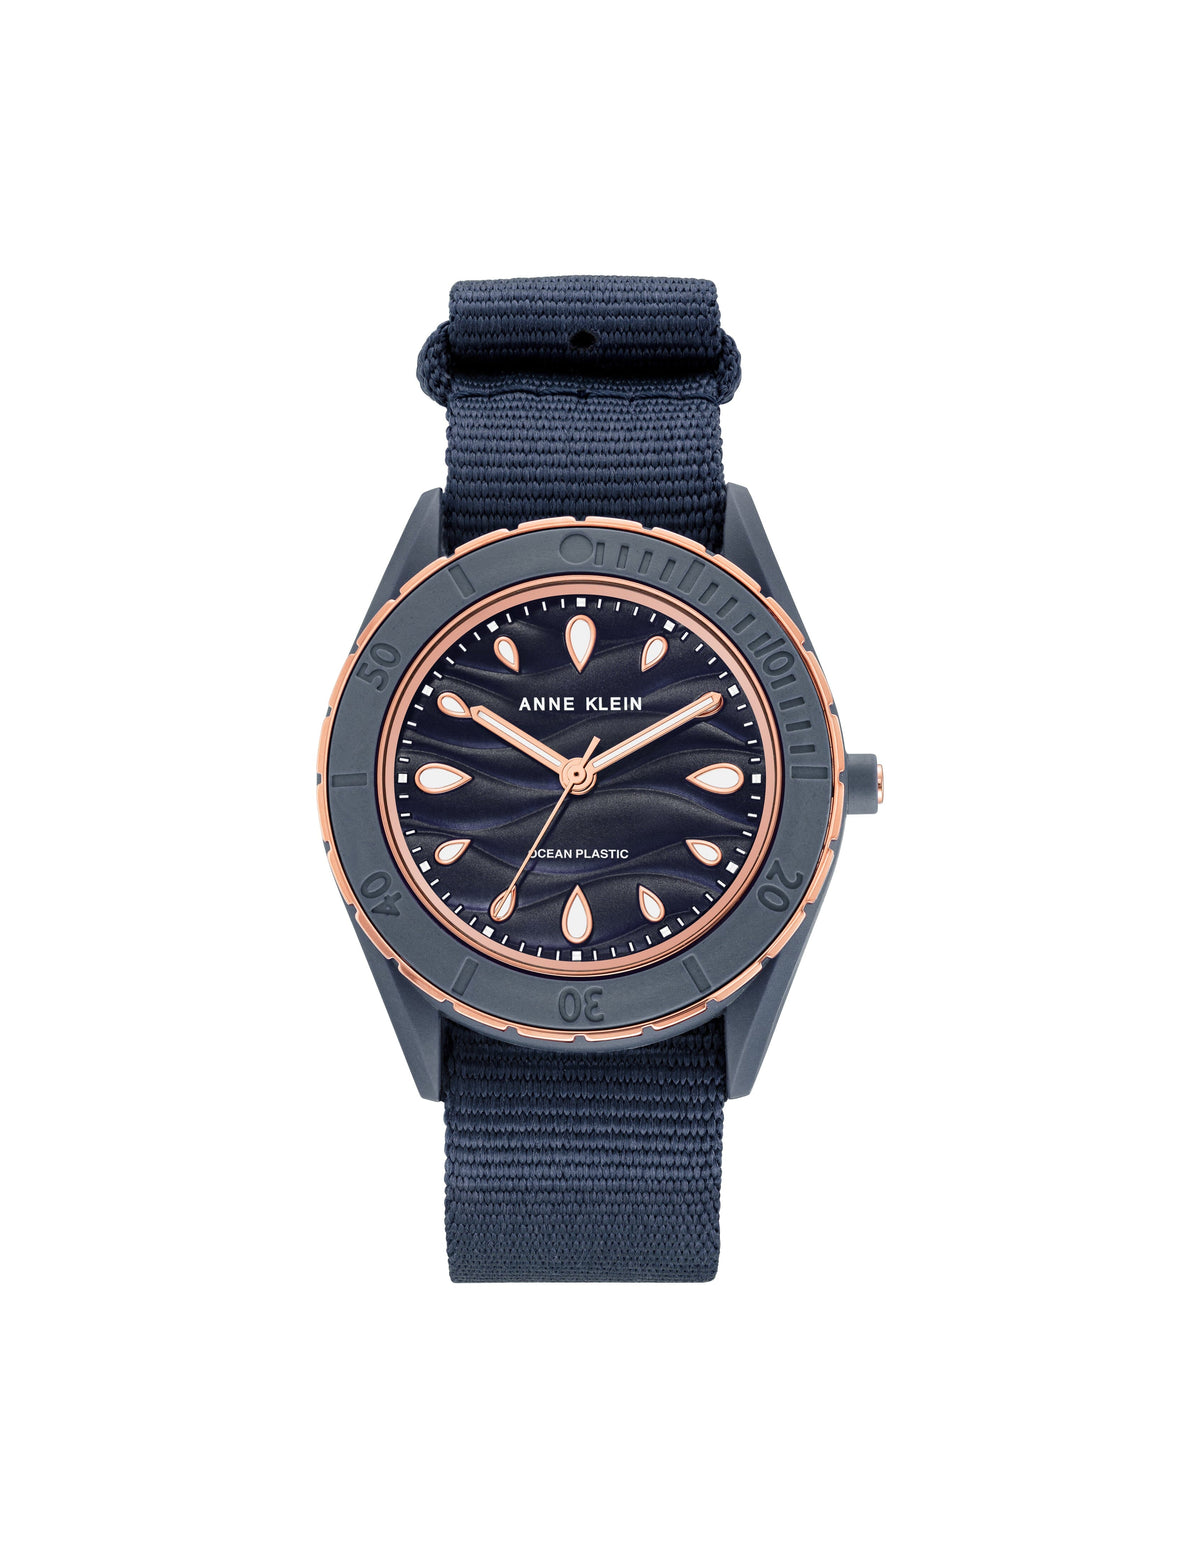 Anne Klein Rose Gold-Tone/ Navy Blue Consider It Solar Recycled Ocean Plastic Woven Strap Watch